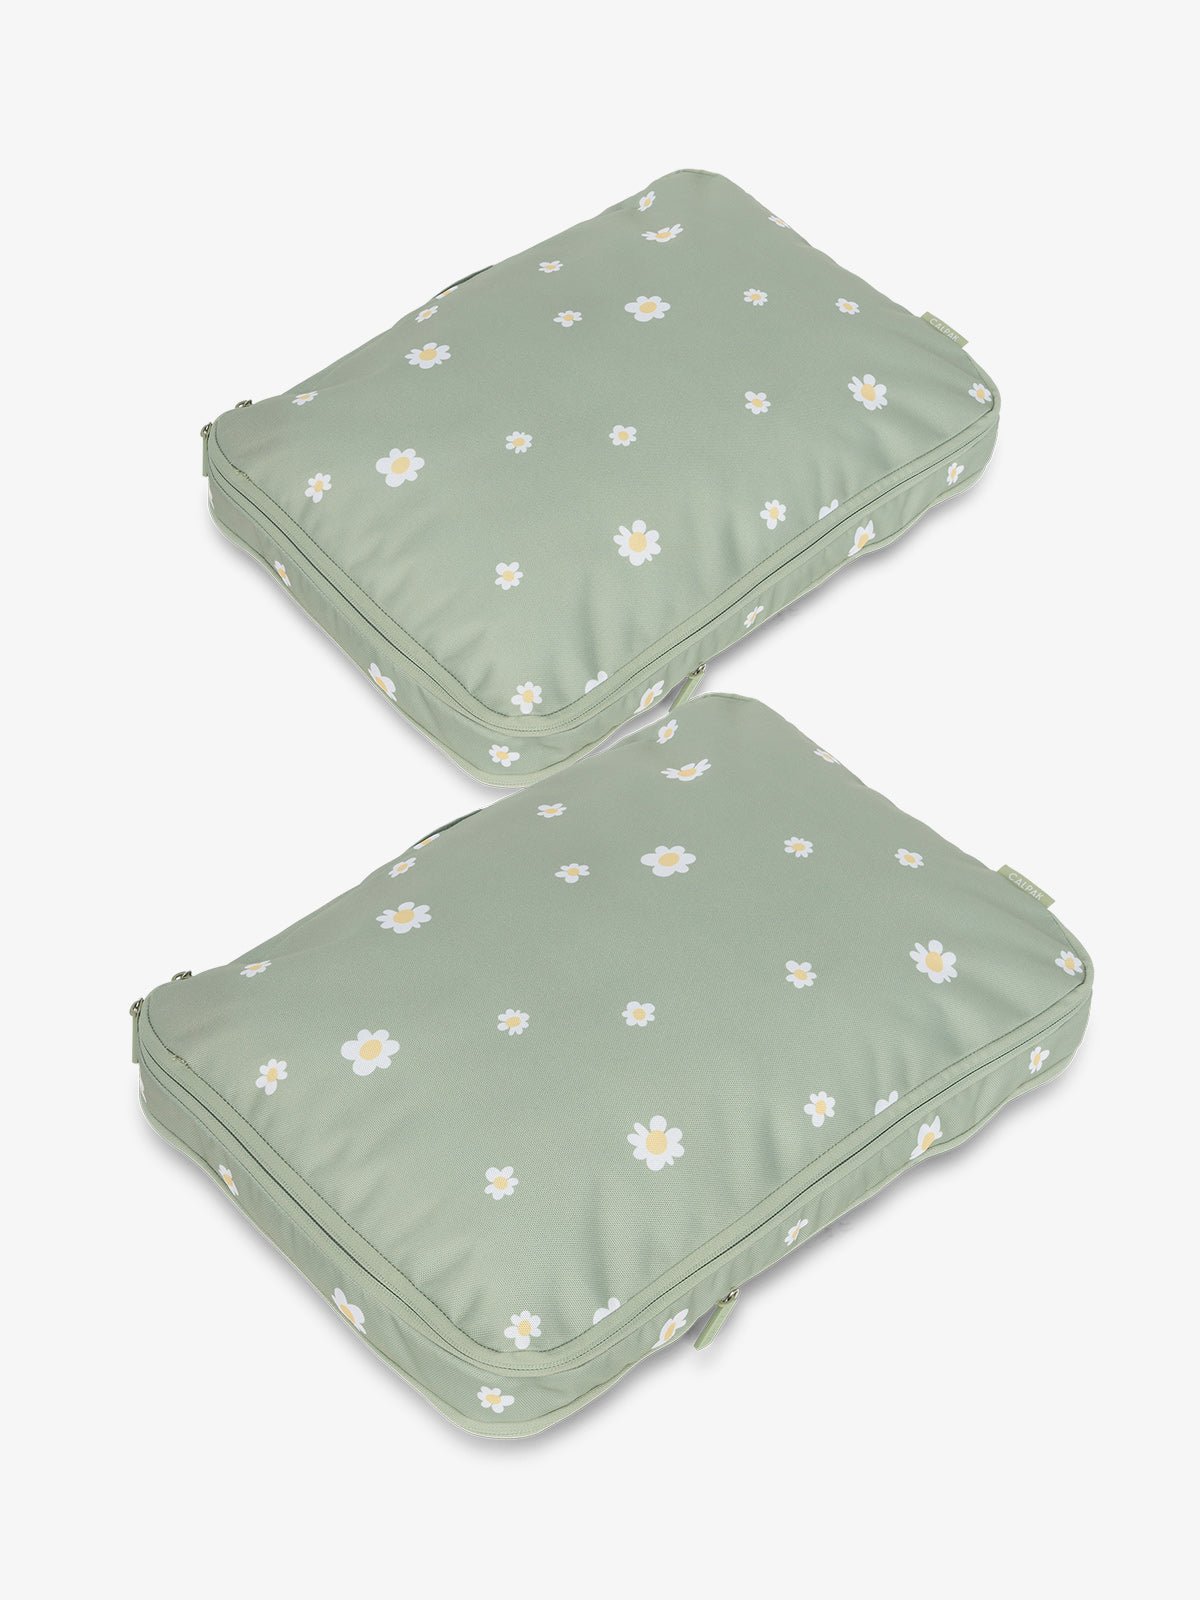 CALPAK Large Compression Packing Cubes in green daisy floral print